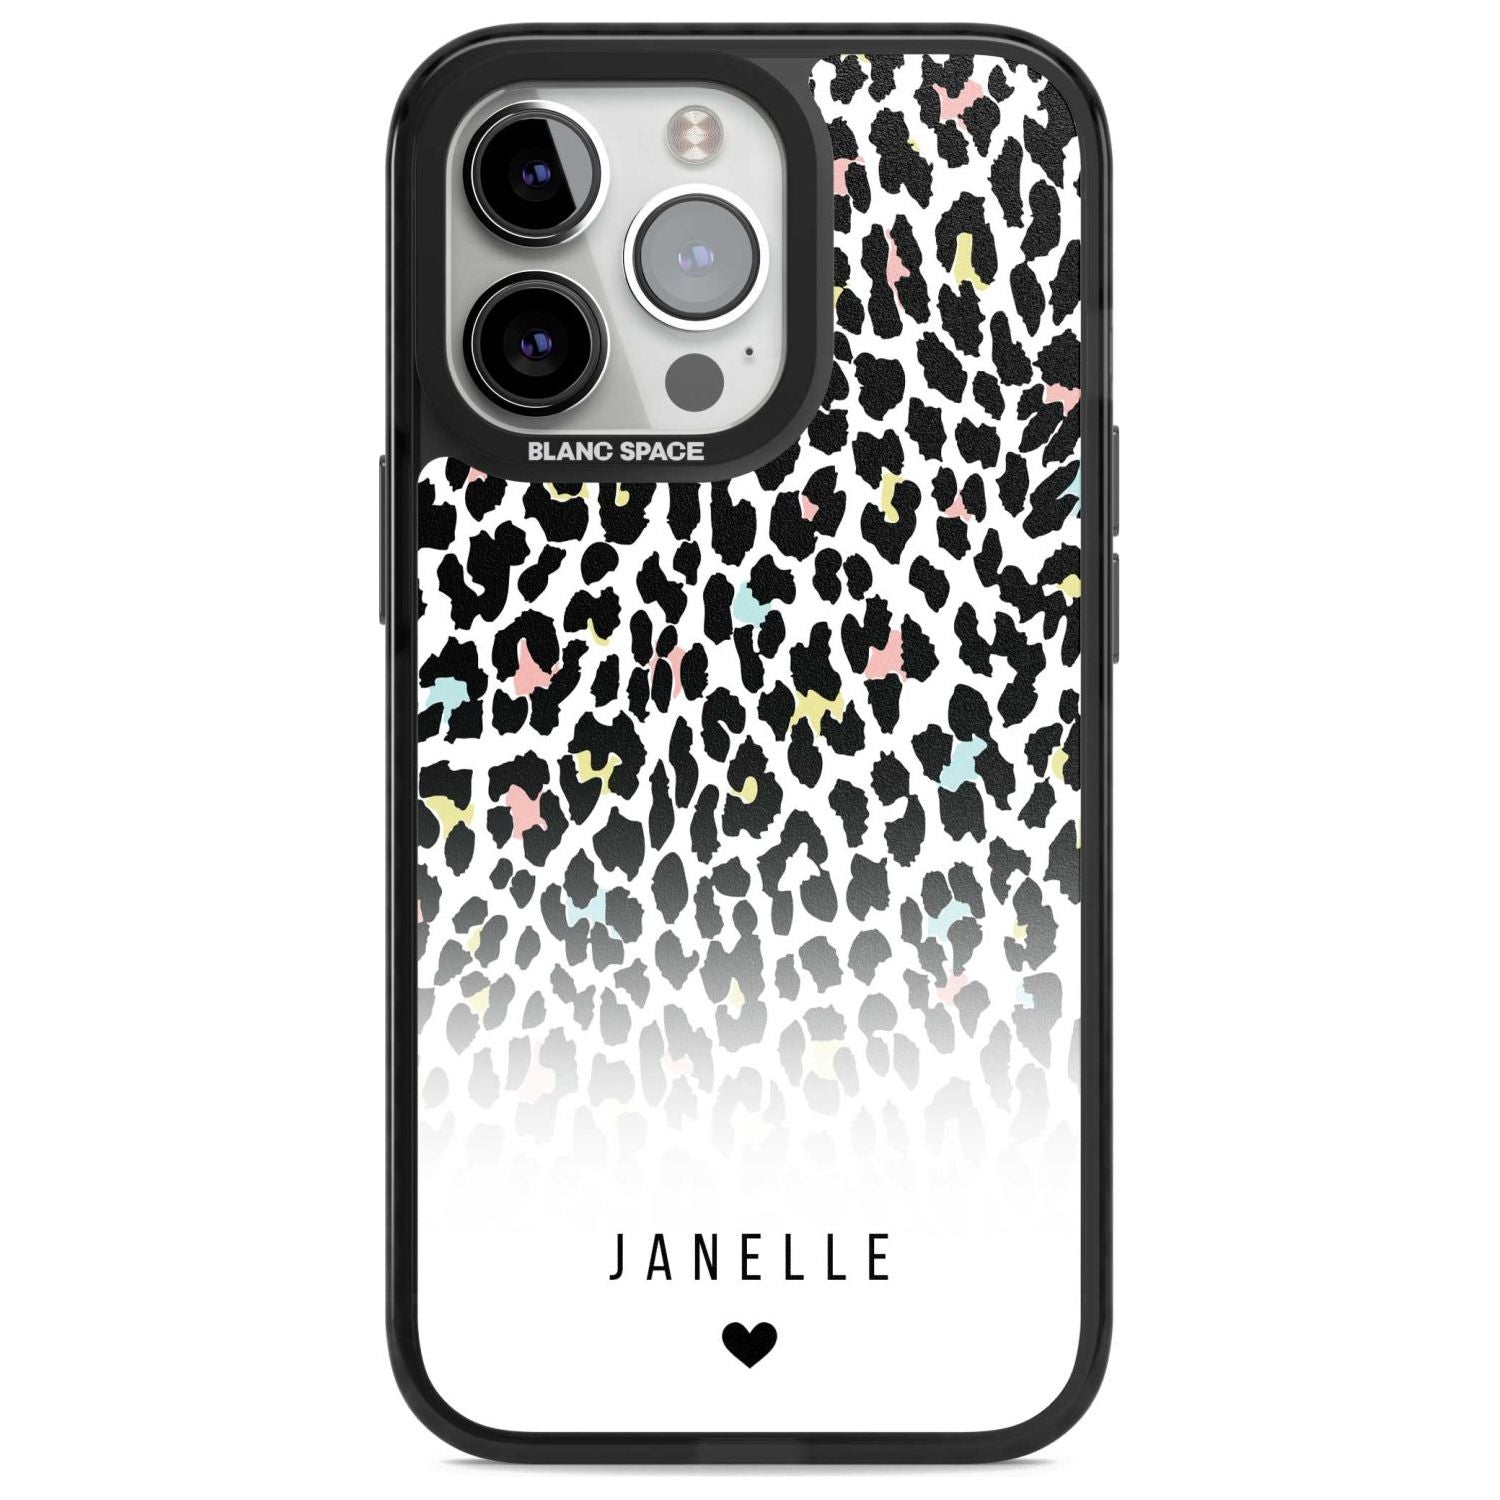 Personalised Pastel Leopard Spots Custom Phone Case iPhone 15 Pro Max / Magsafe Black Impact Case,iPhone 15 Pro / Magsafe Black Impact Case,iPhone 14 Pro Max / Magsafe Black Impact Case,iPhone 14 Pro / Magsafe Black Impact Case,iPhone 13 Pro / Magsafe Black Impact Case Blanc Space